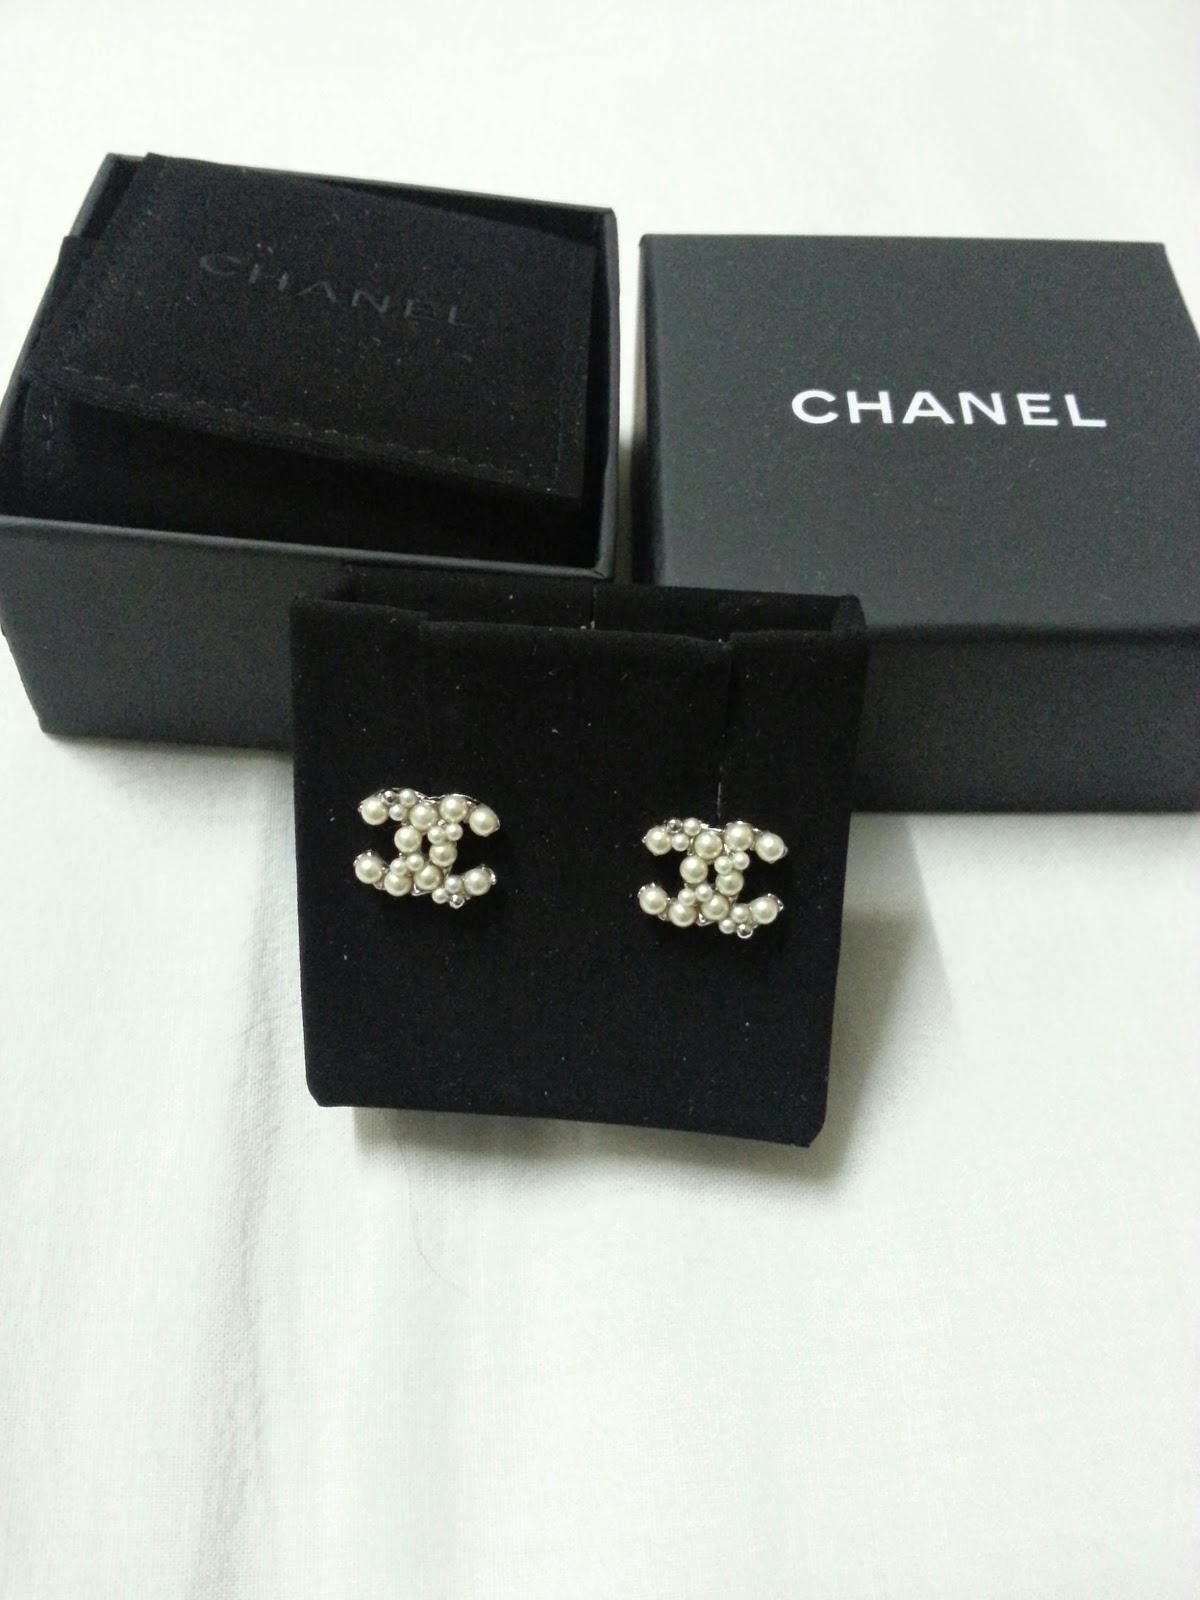 The Chic Sac: Chanel Encrusted CC Earrings